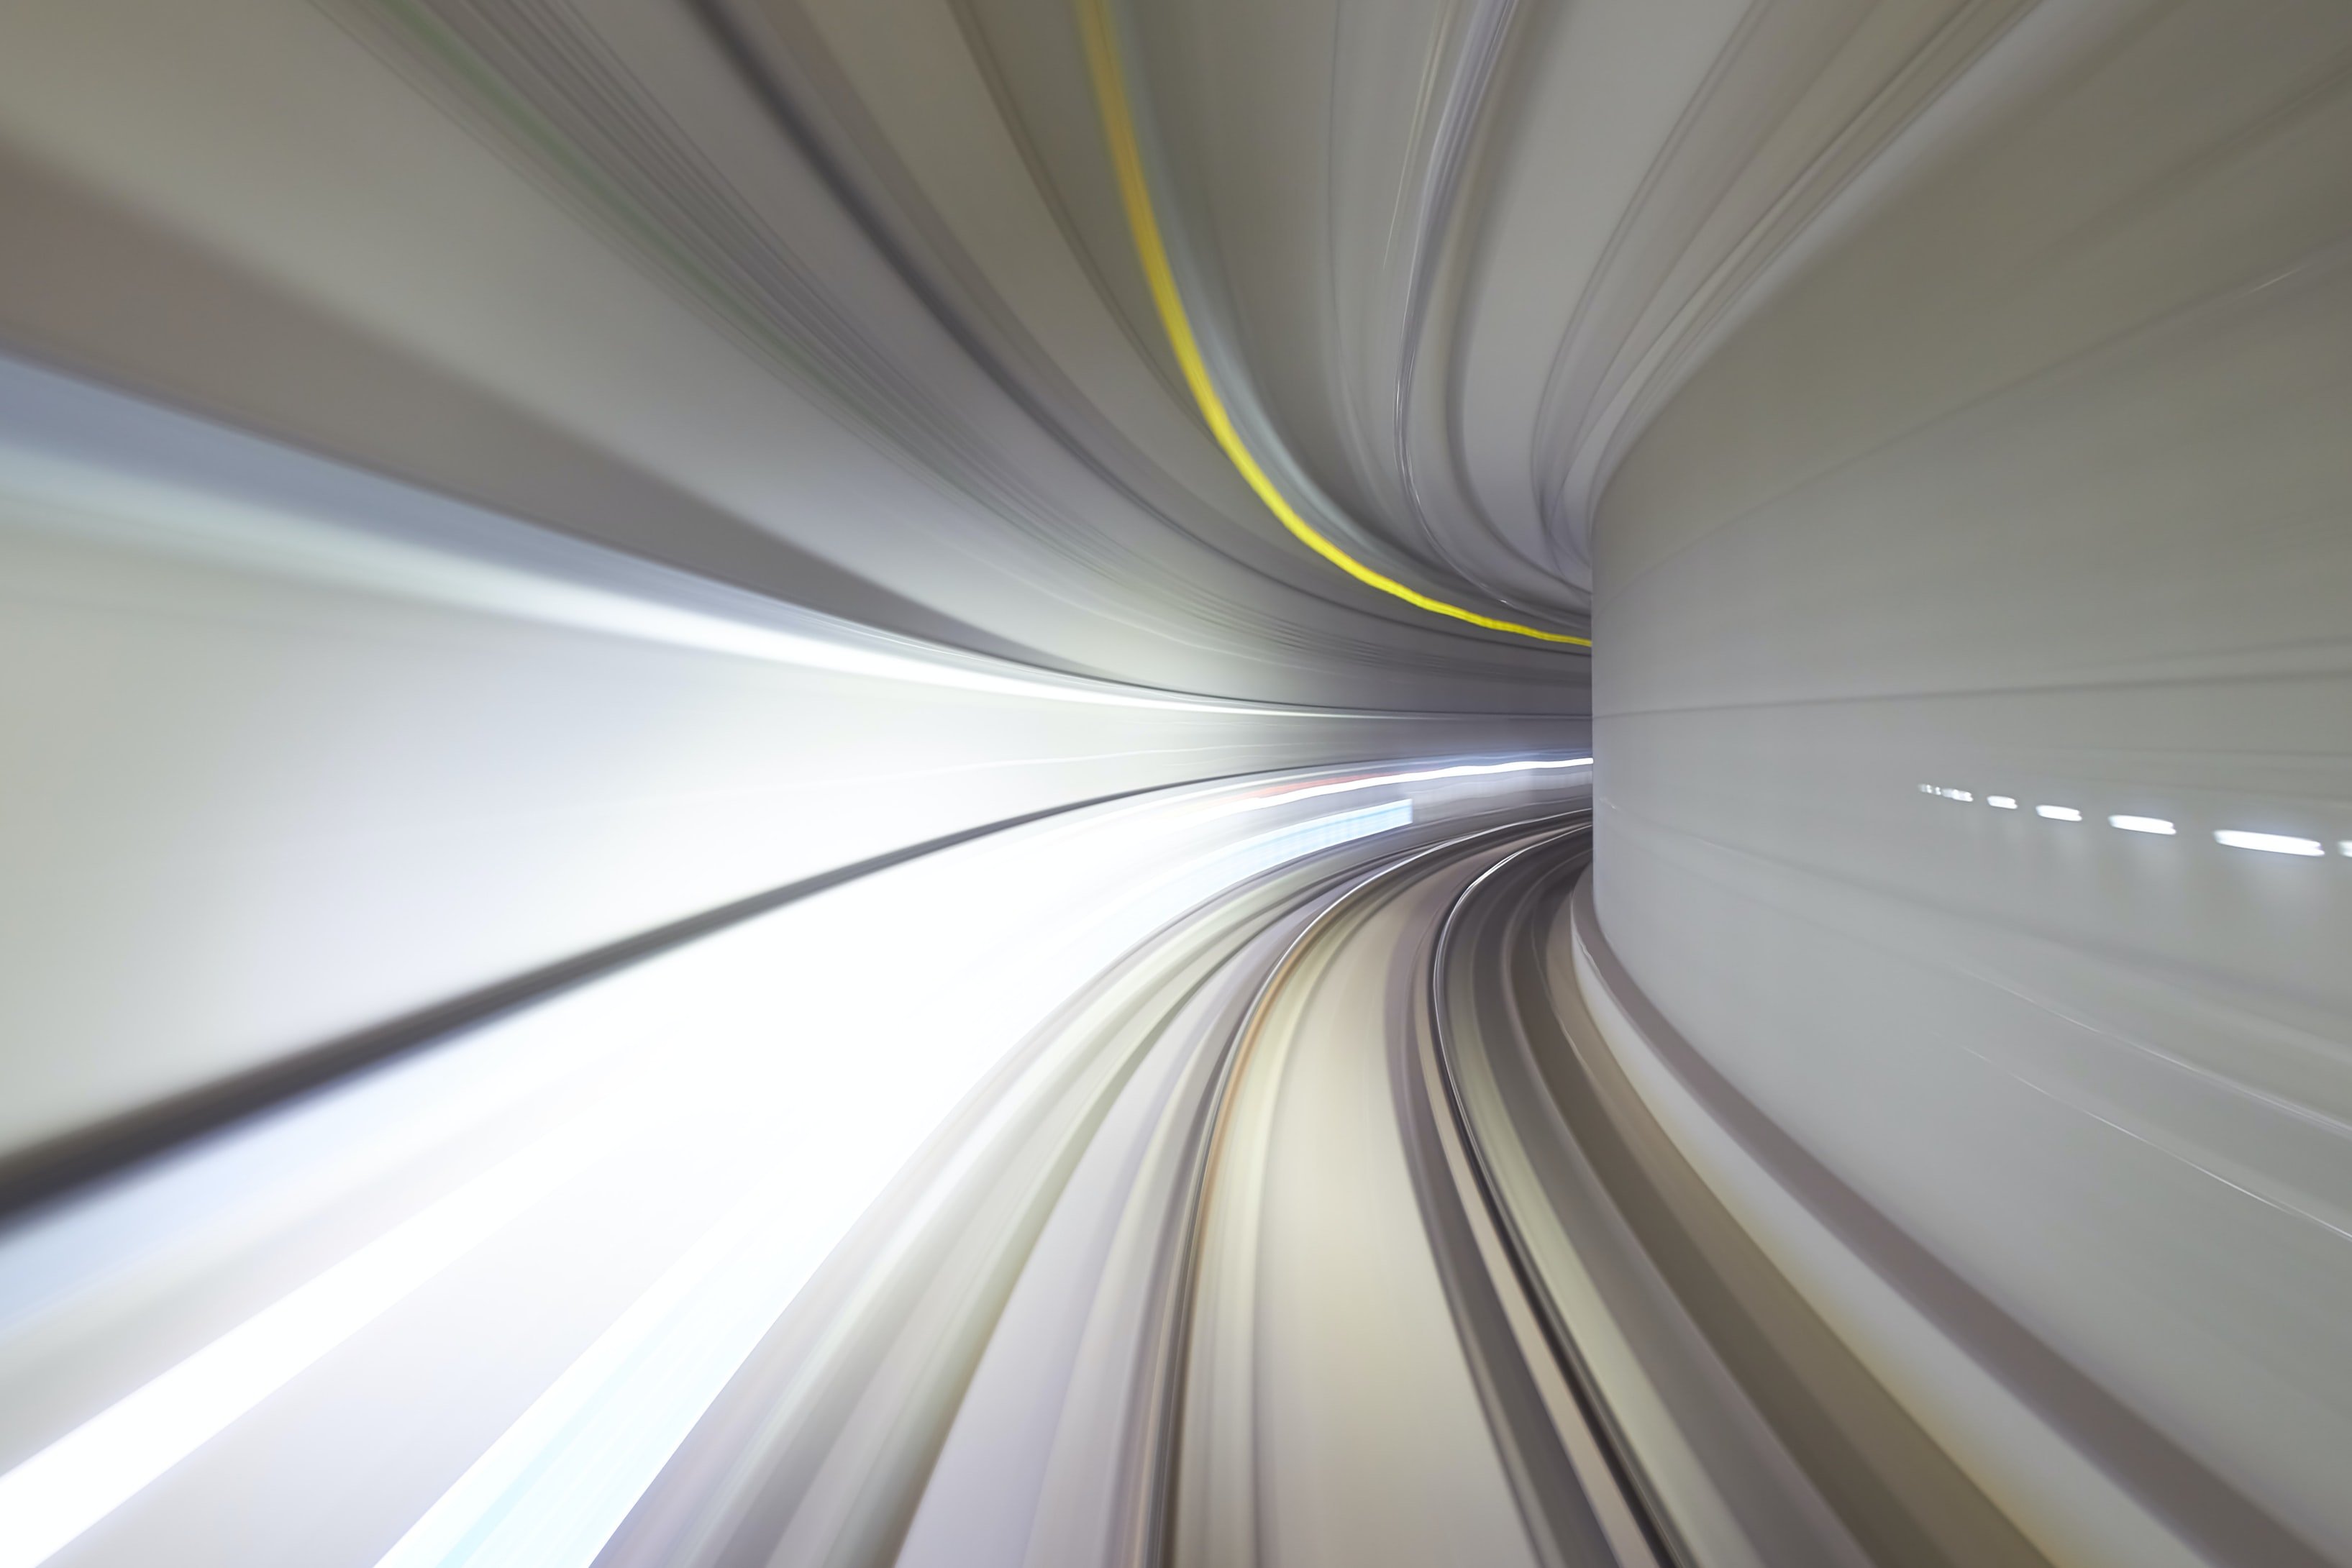 A long exposure of lights showing movement through a tunnel.